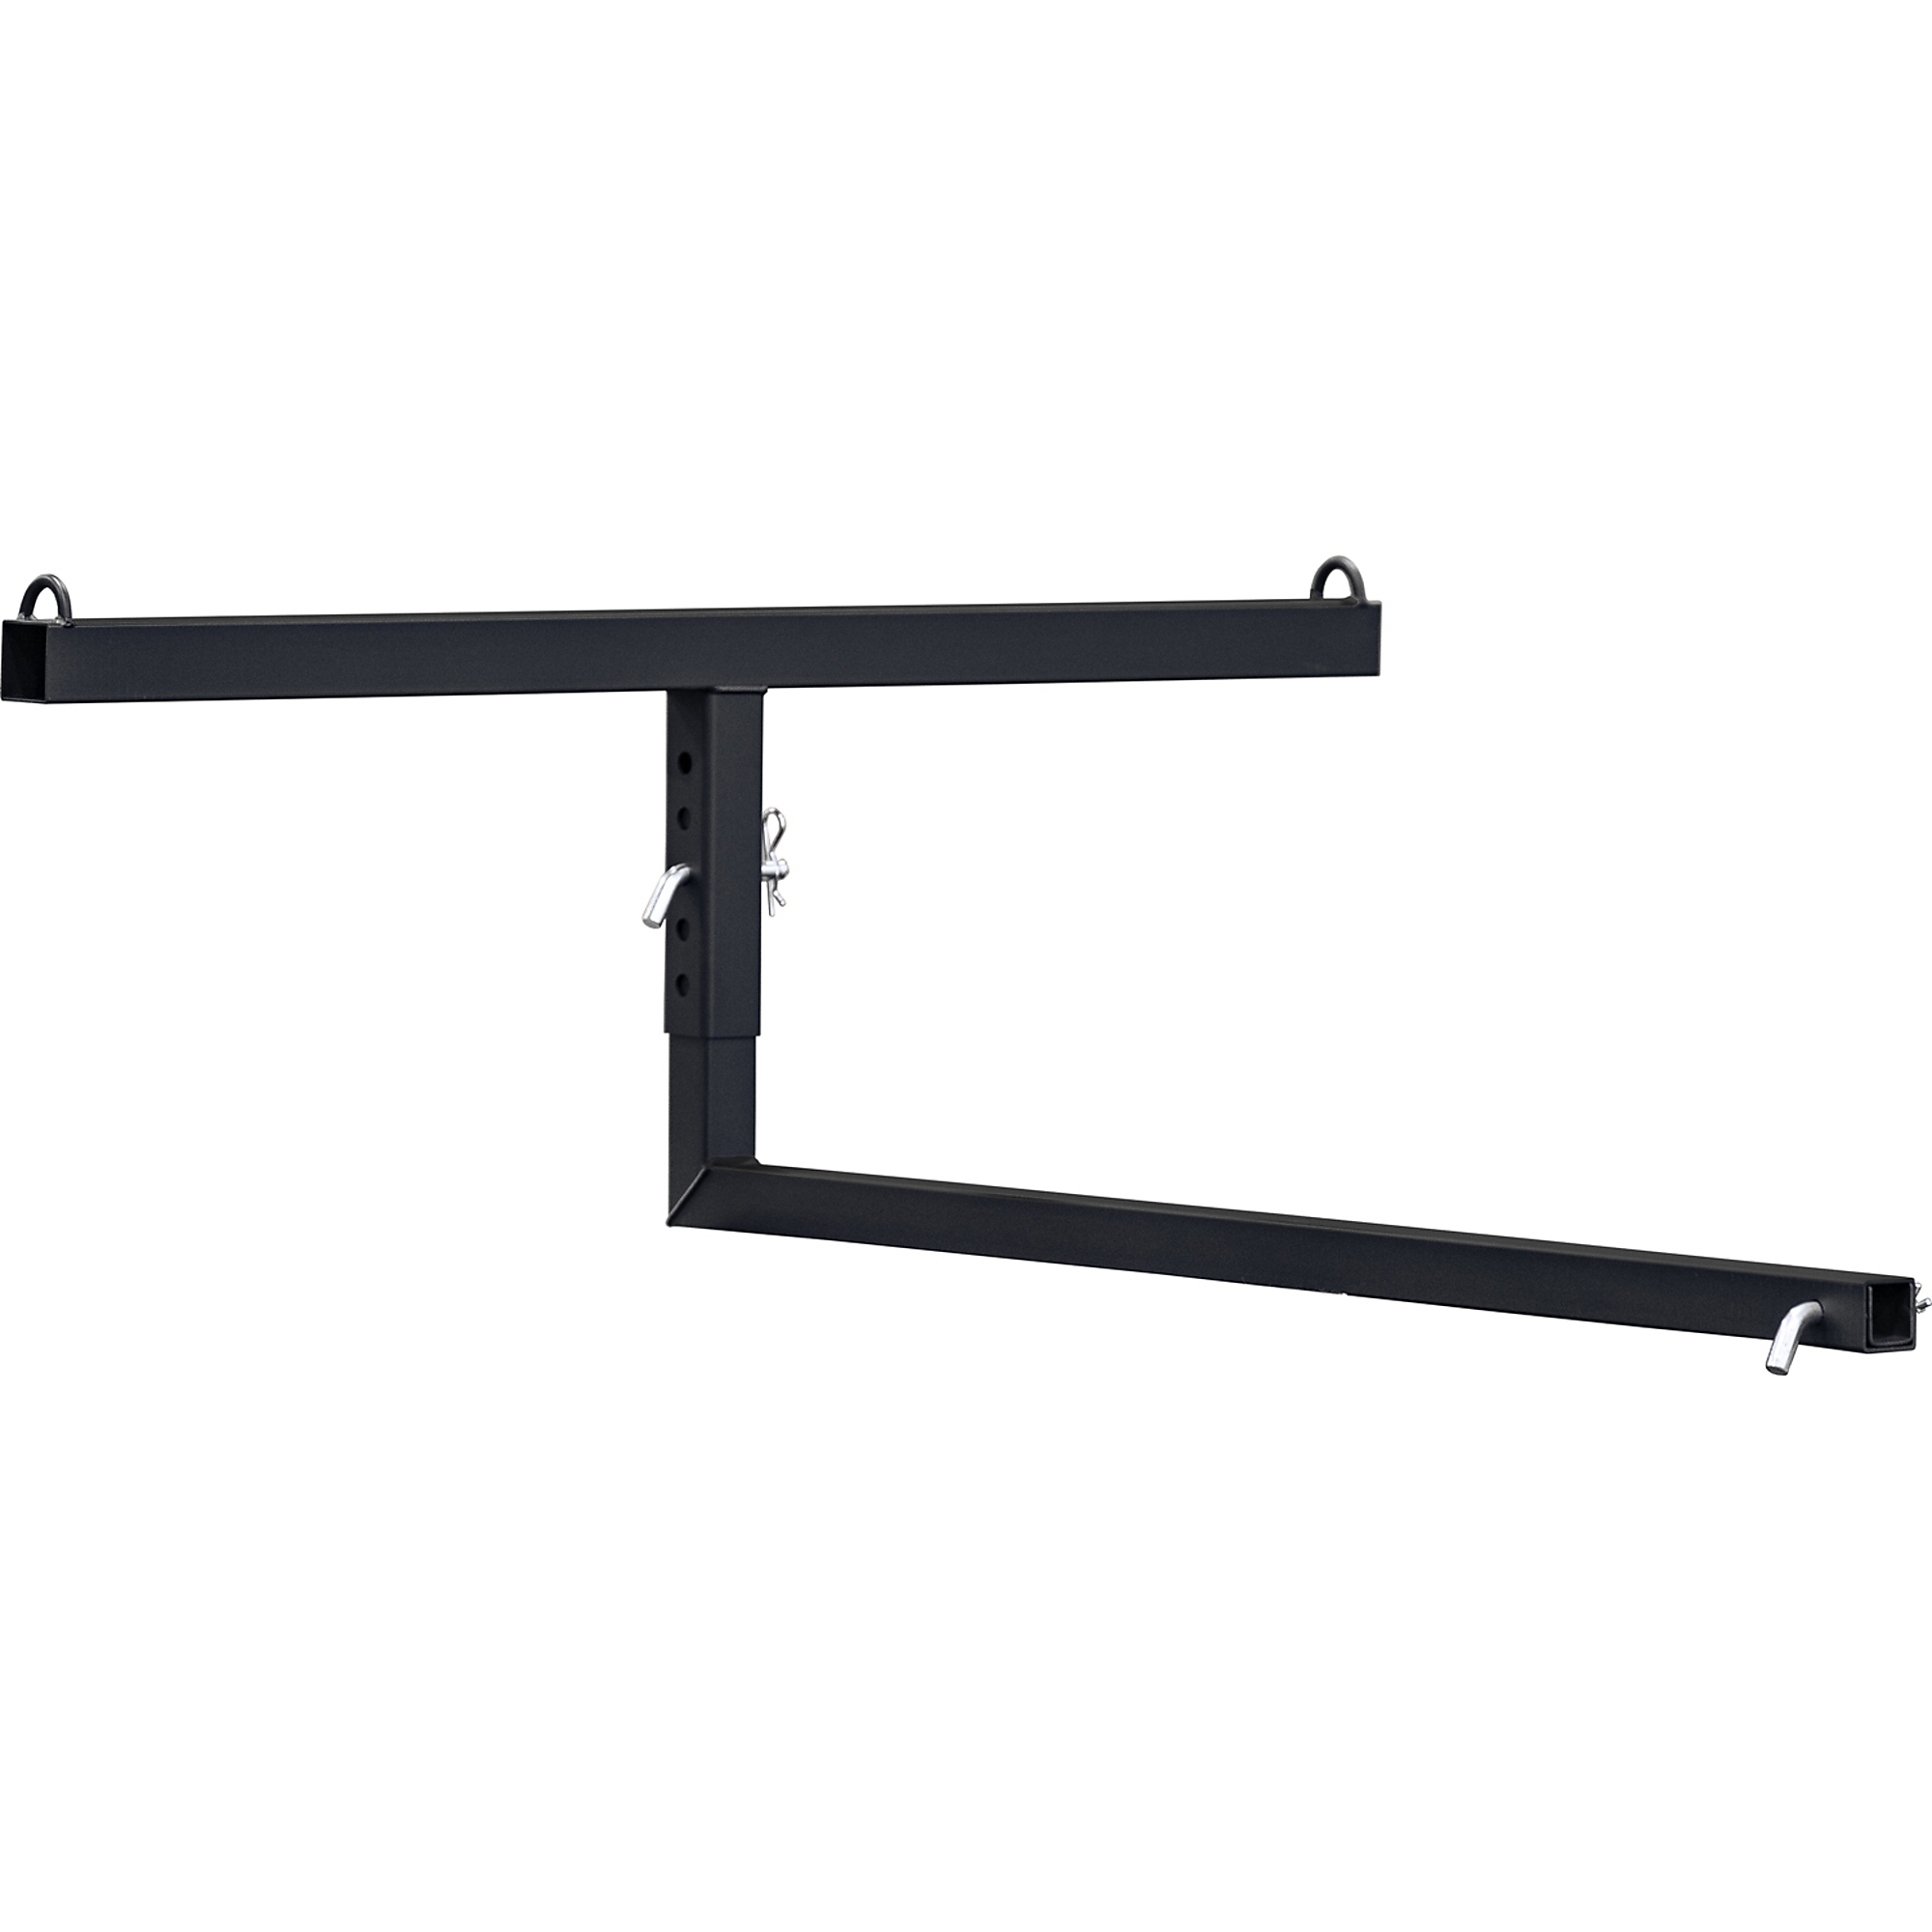 Buyers Products, Truck Bed Extender, Color Black, Finish Powder-Coat, Material Carbon Steel, Model 1804100